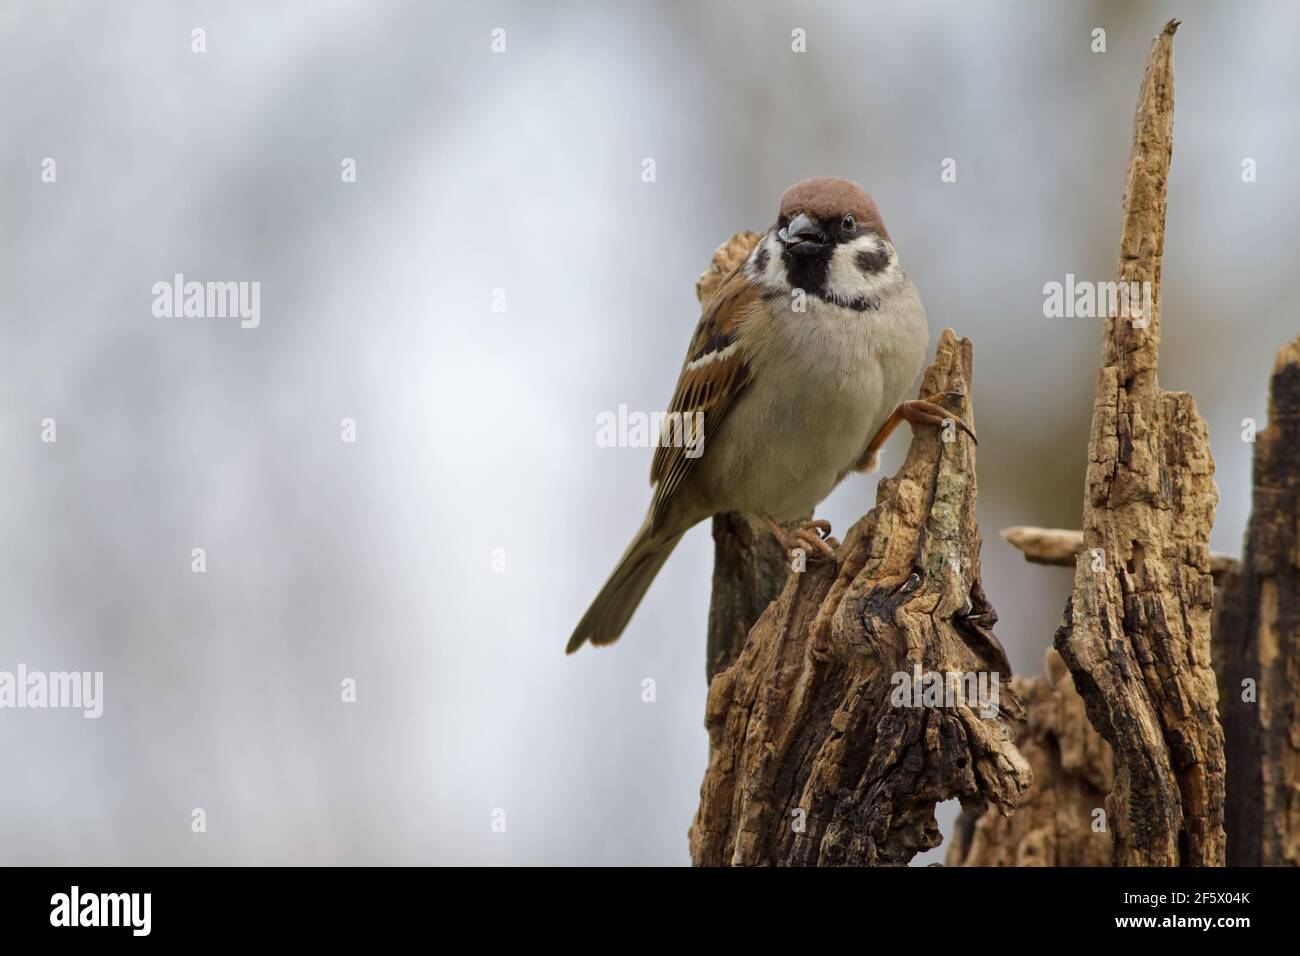 Eurasian tree sparrow (Passer montanus) with the sunflower seed in its beak. Stock Photo